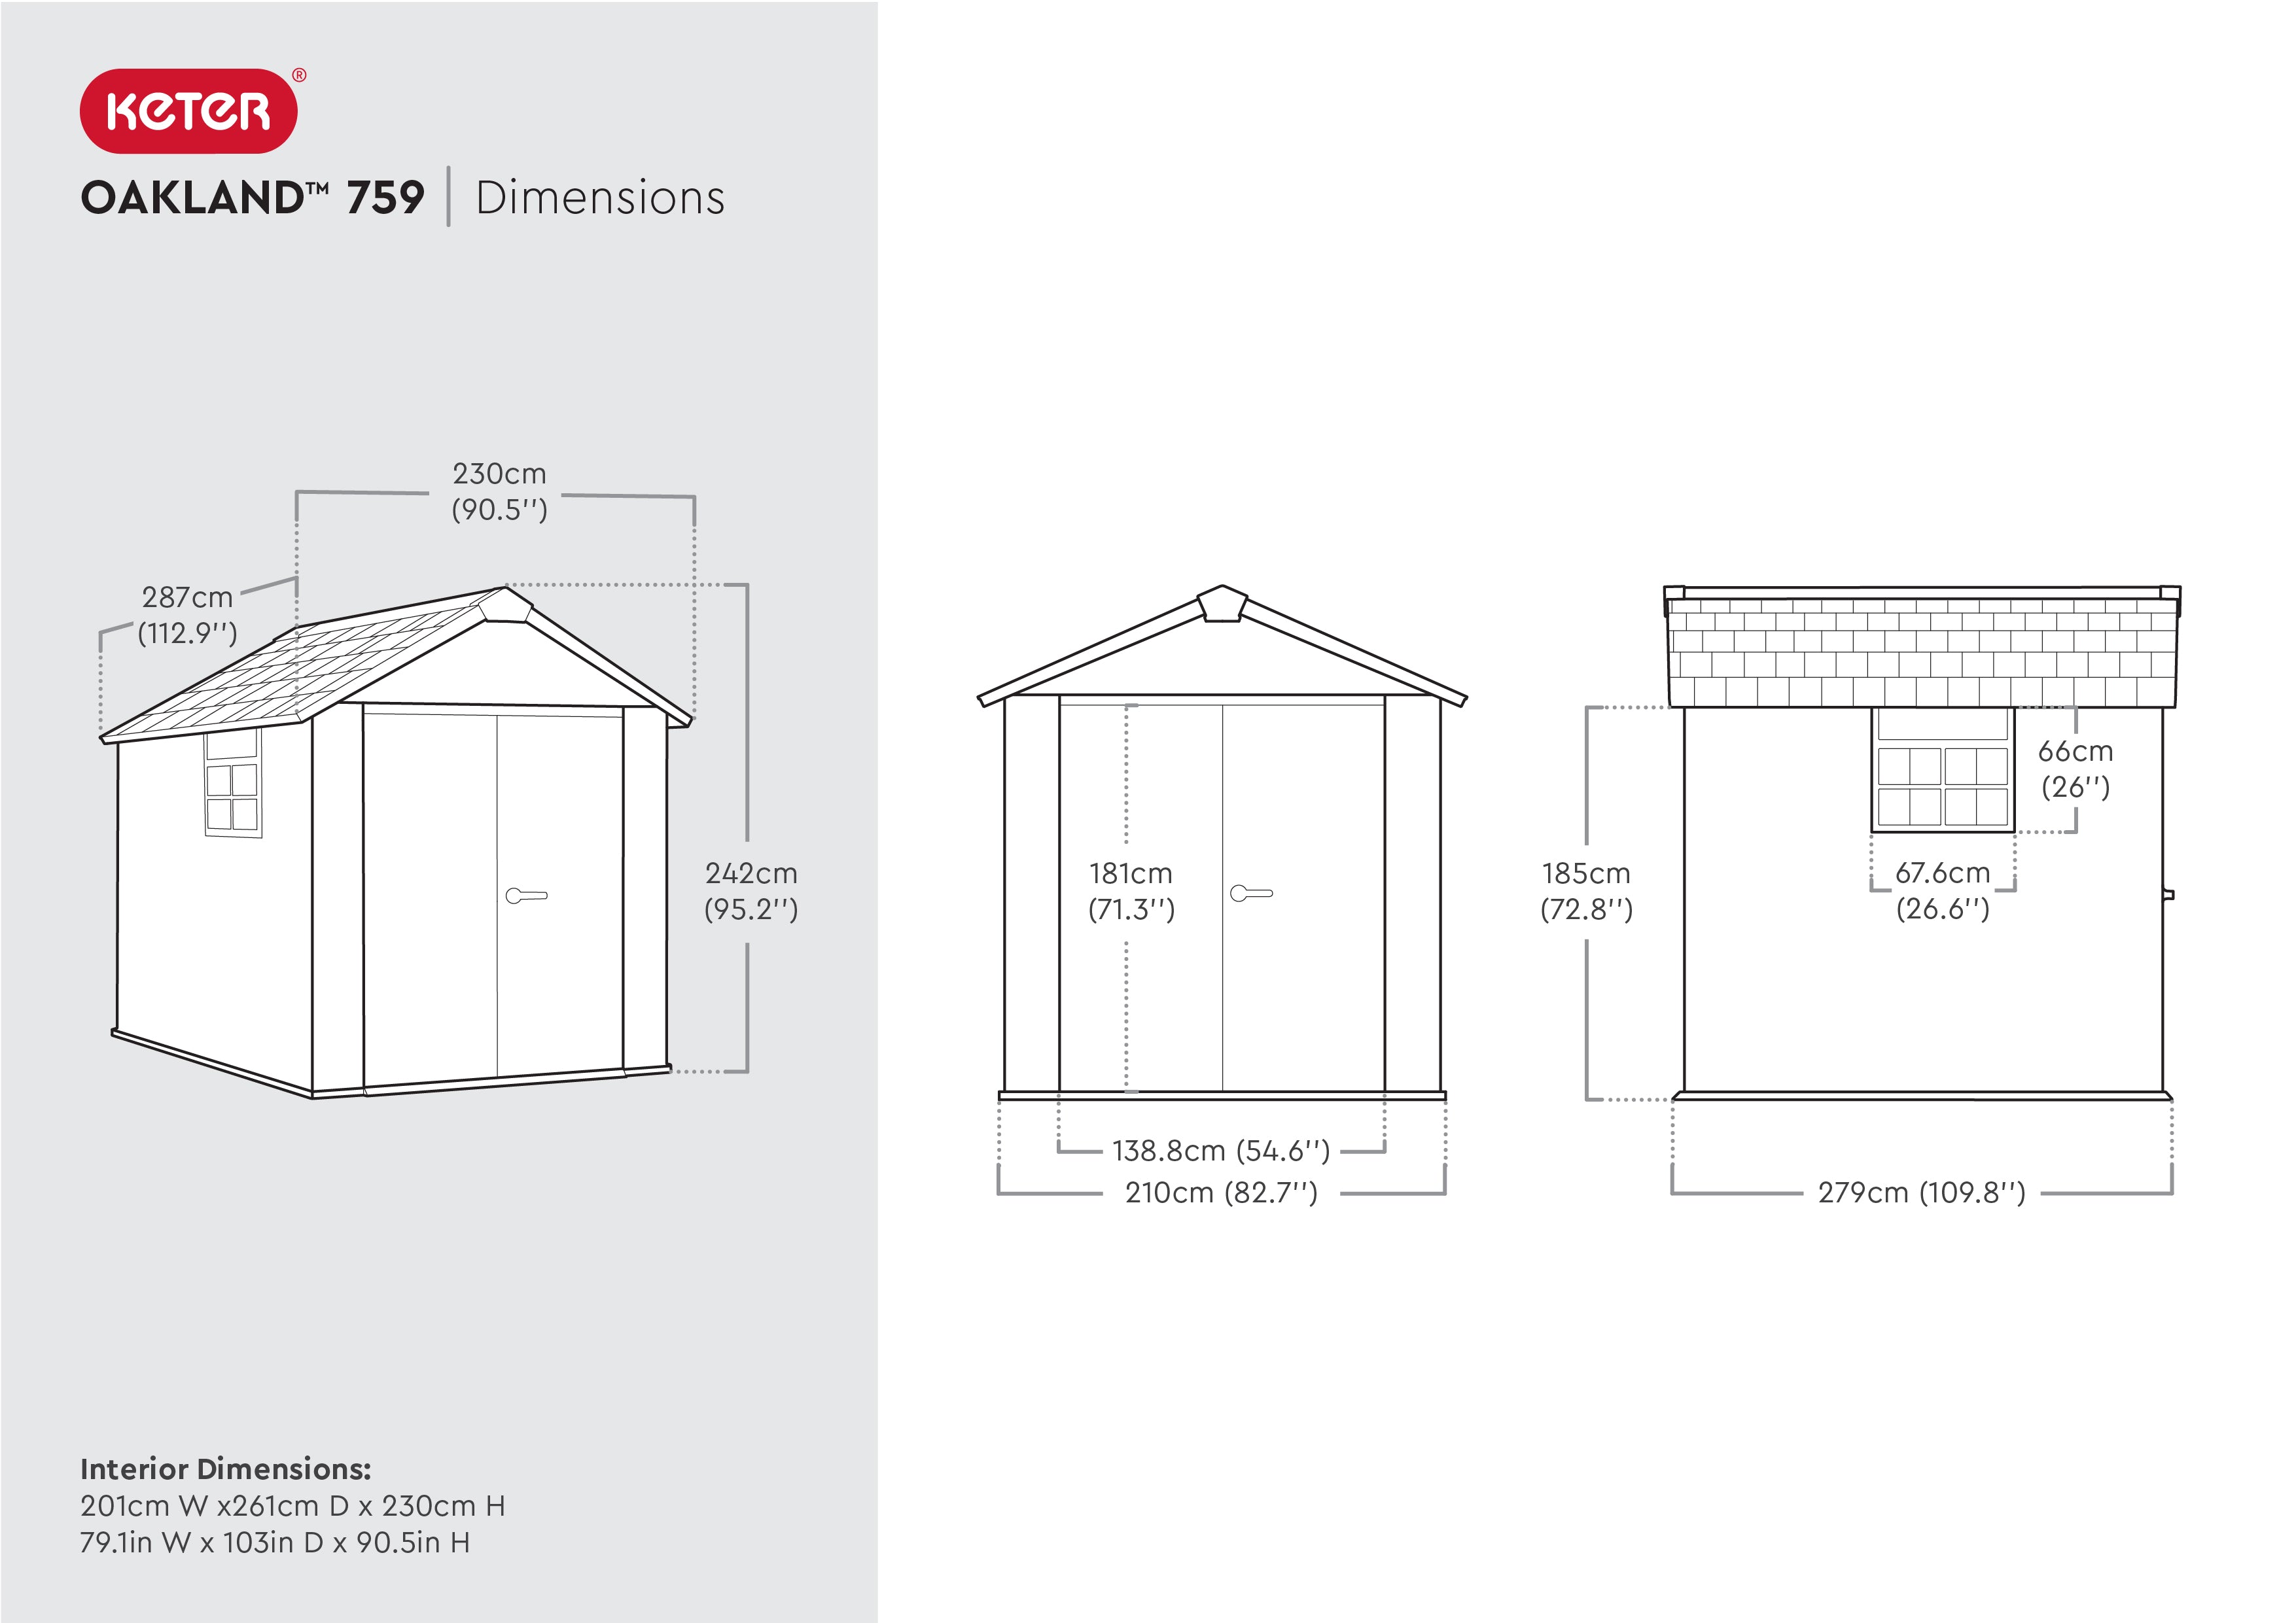 Dimensions for the Keter Oakland 758 shed